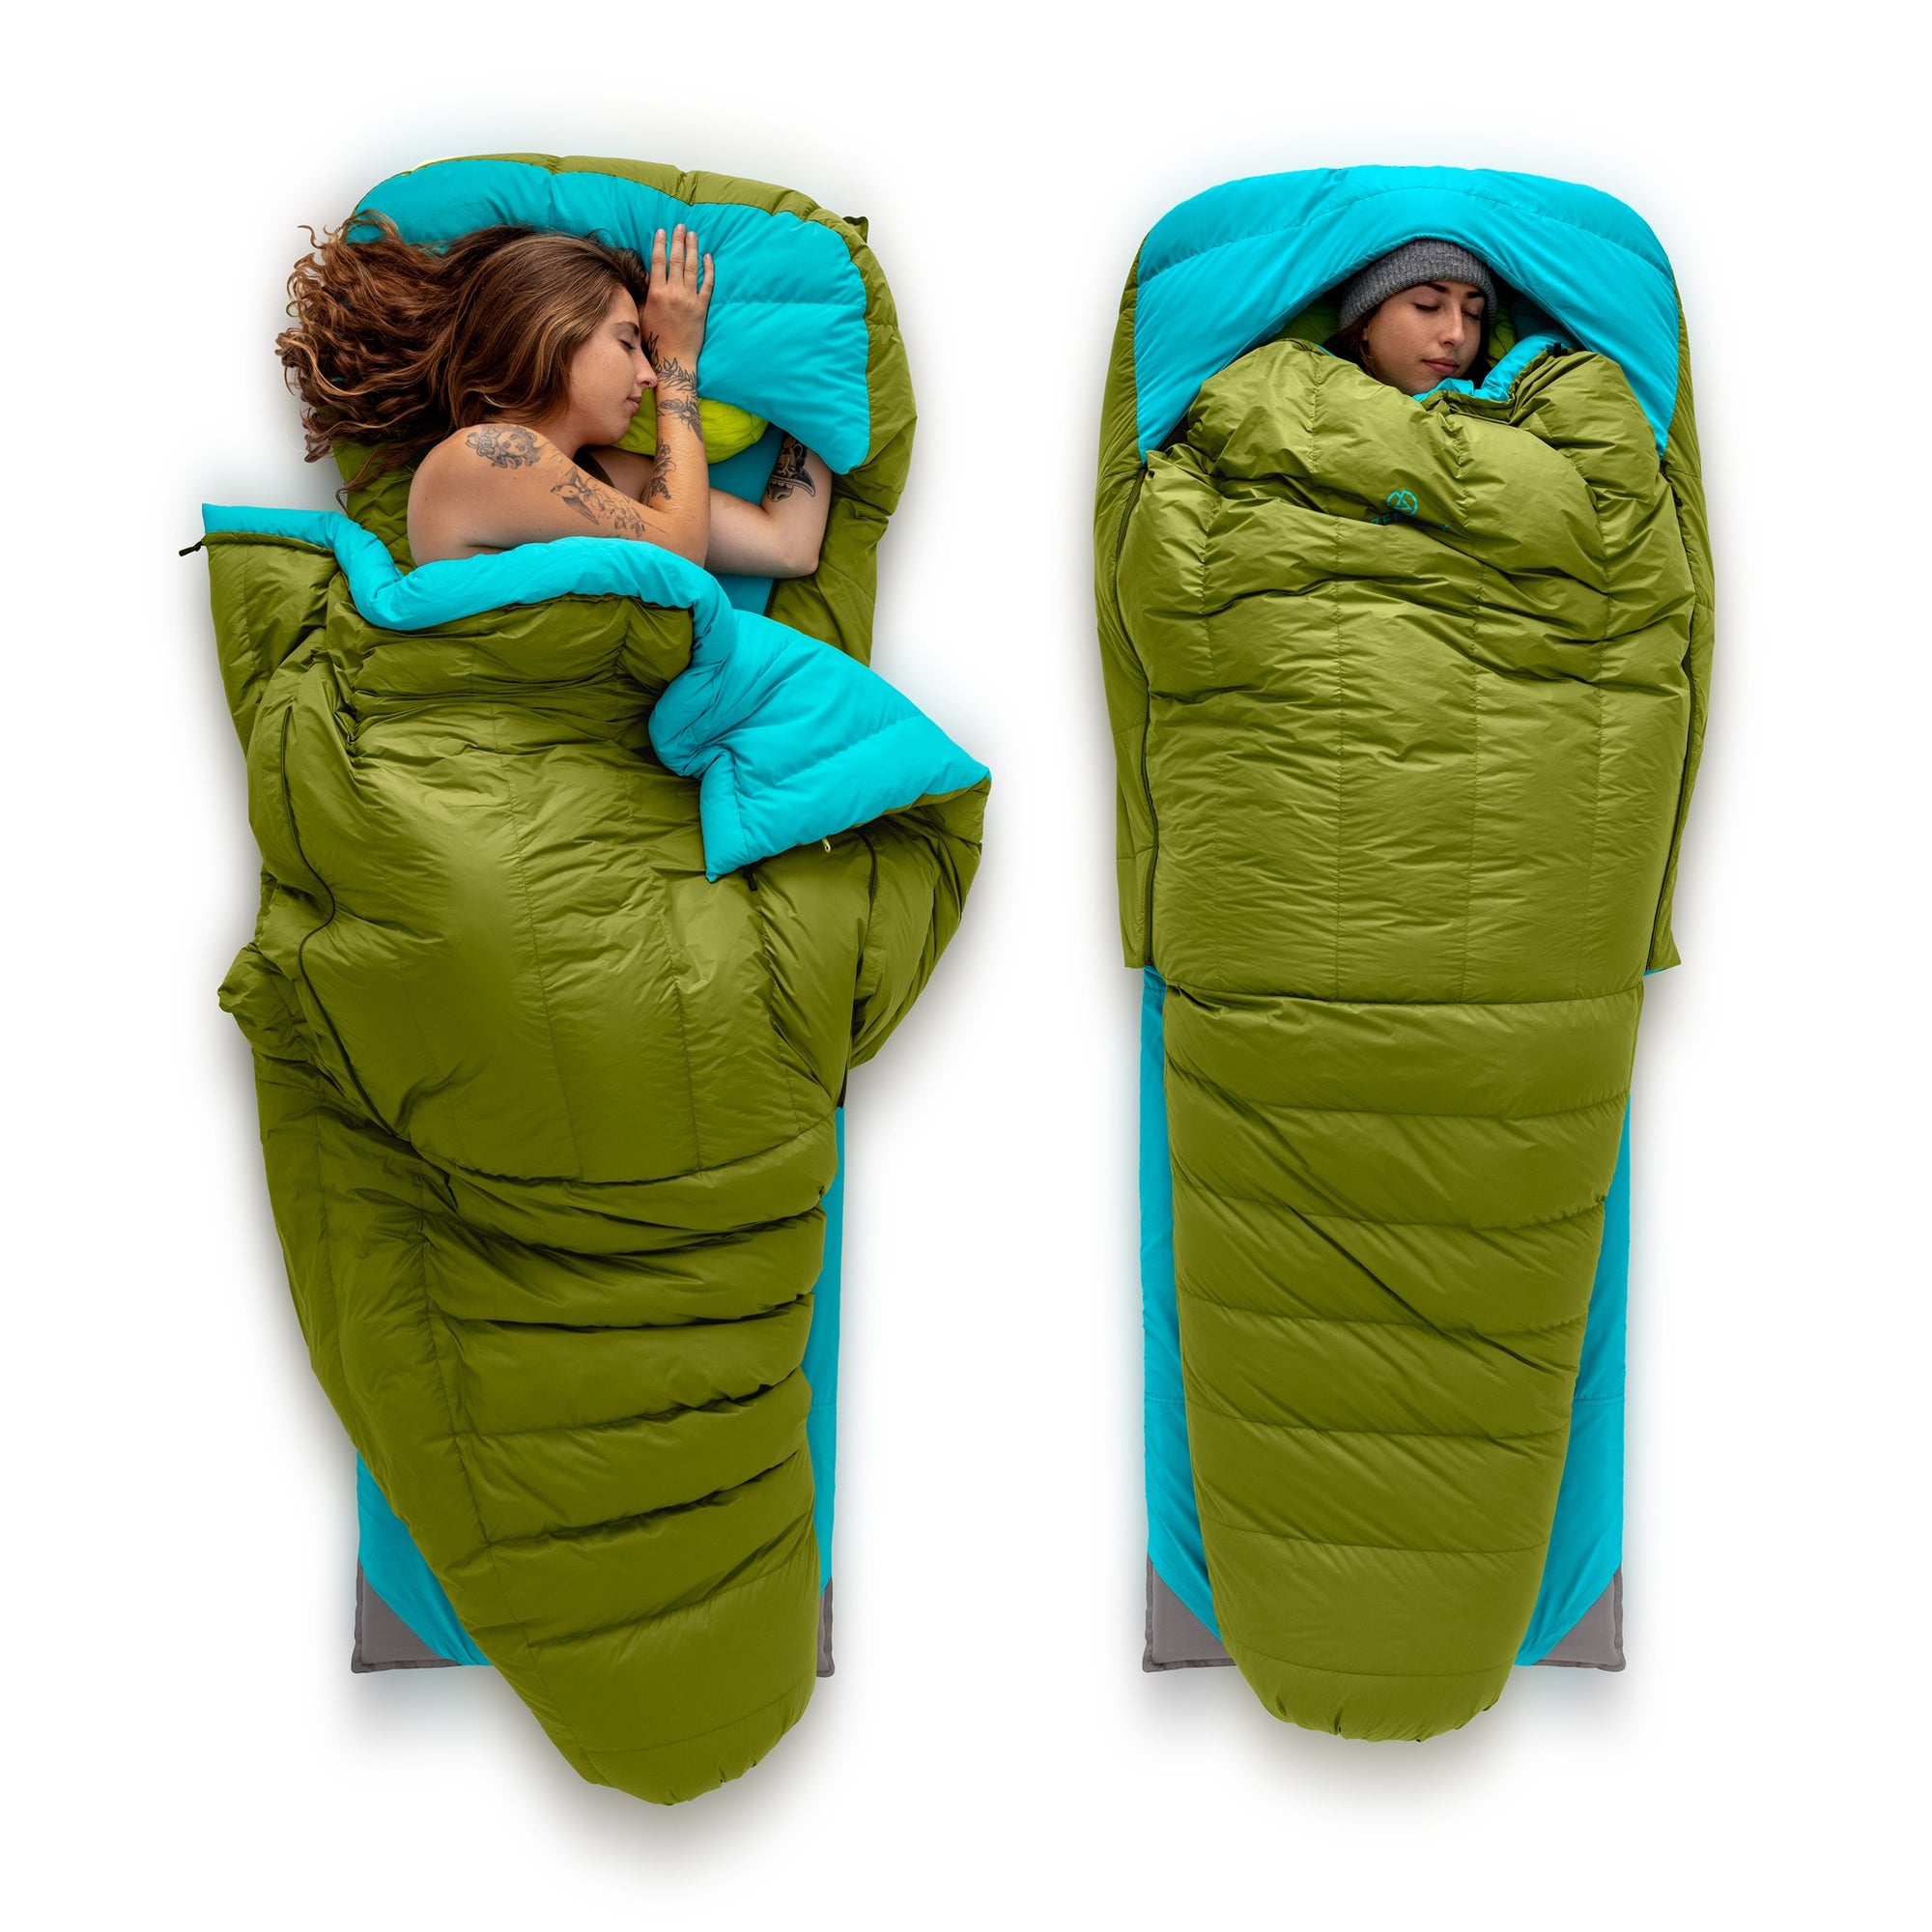 The Zenbivy Bed sleeping bag allows you to sleep in any position, just like you would in your bed at home. 